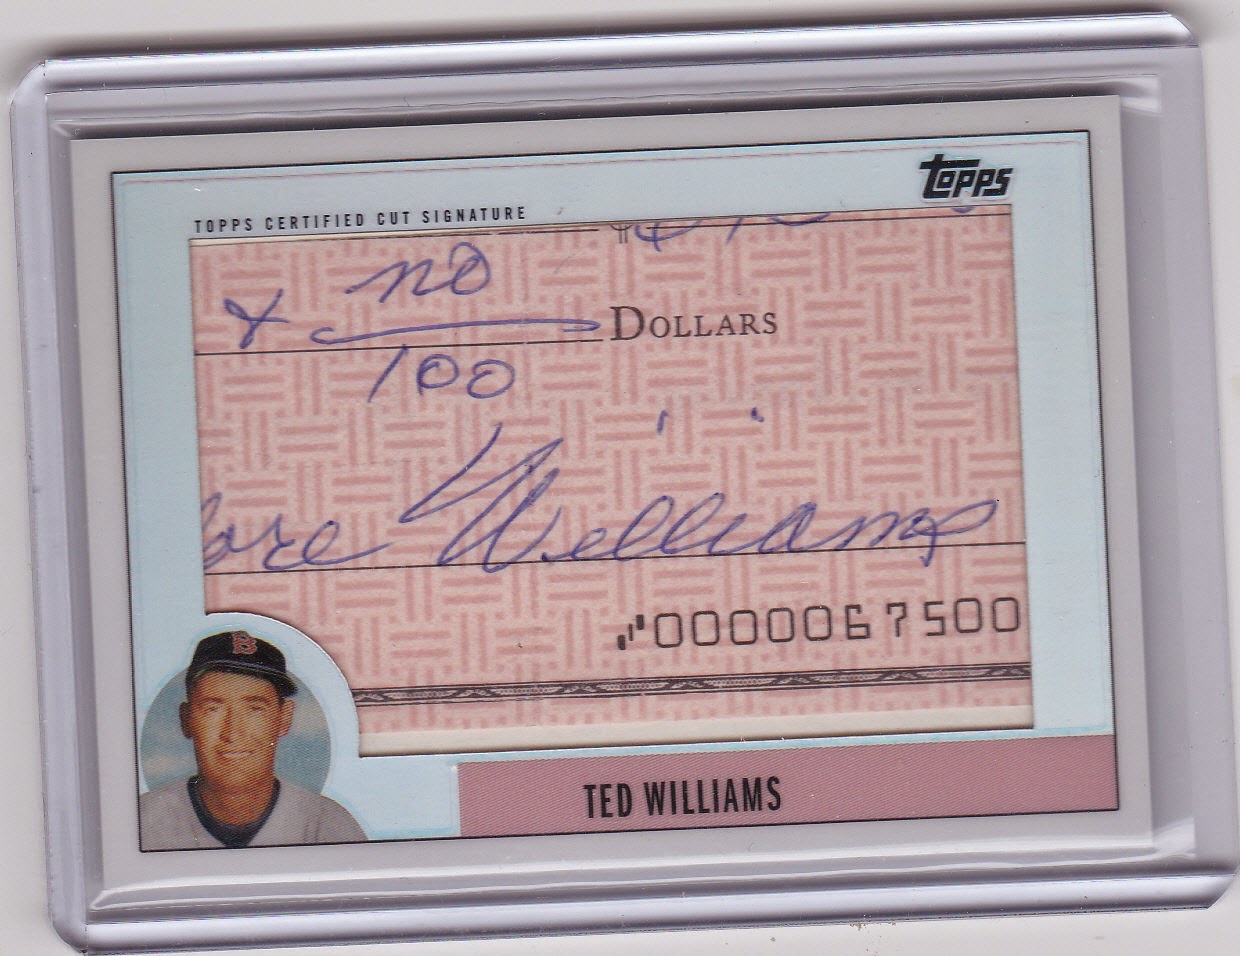 Baseball Card Breakdown: Nothing splendid about these Ted Williams